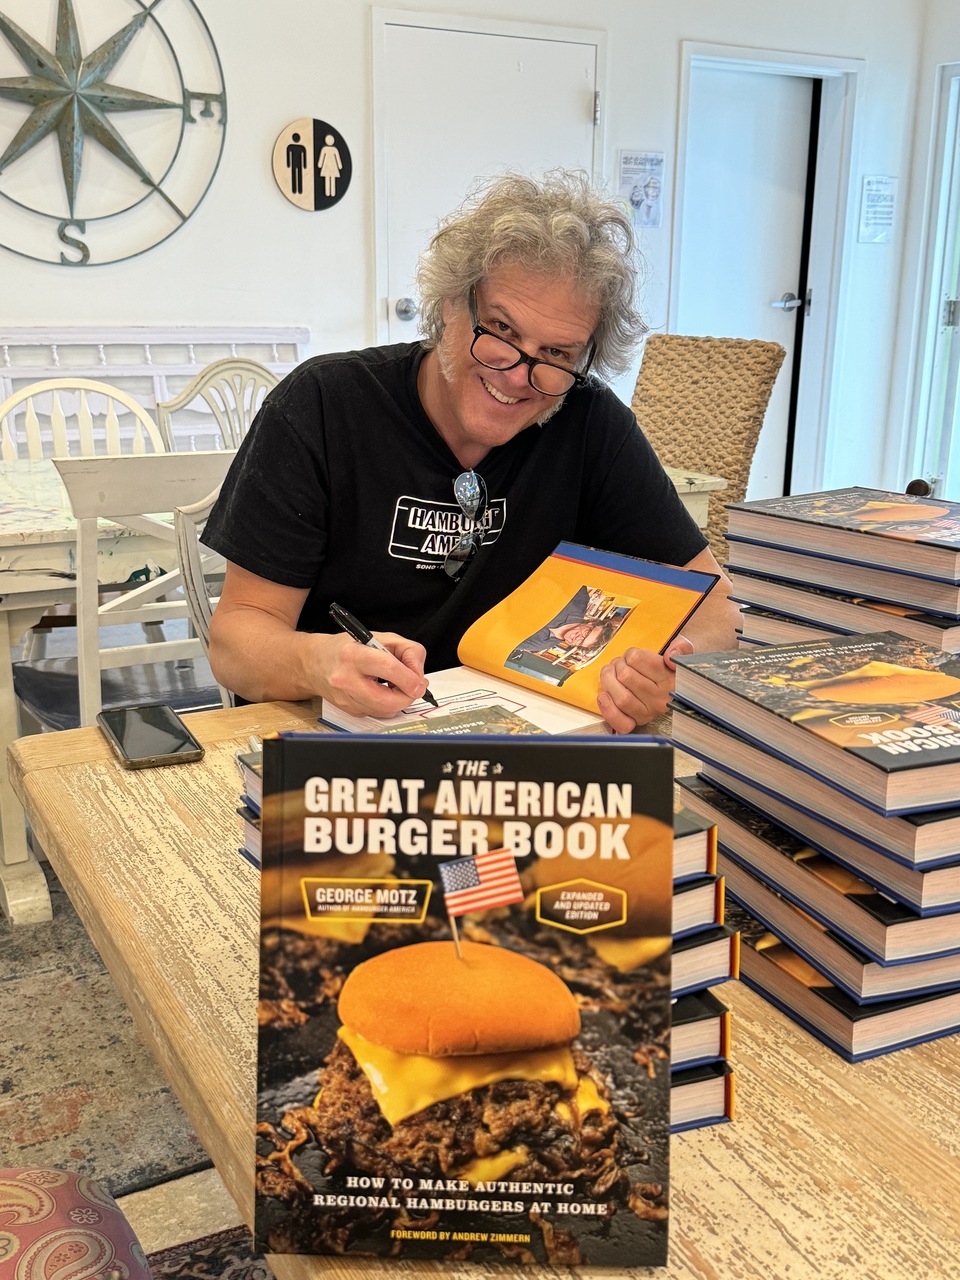 George Motz signing his book, "The Great American Burger Book" available wherever books are sold.